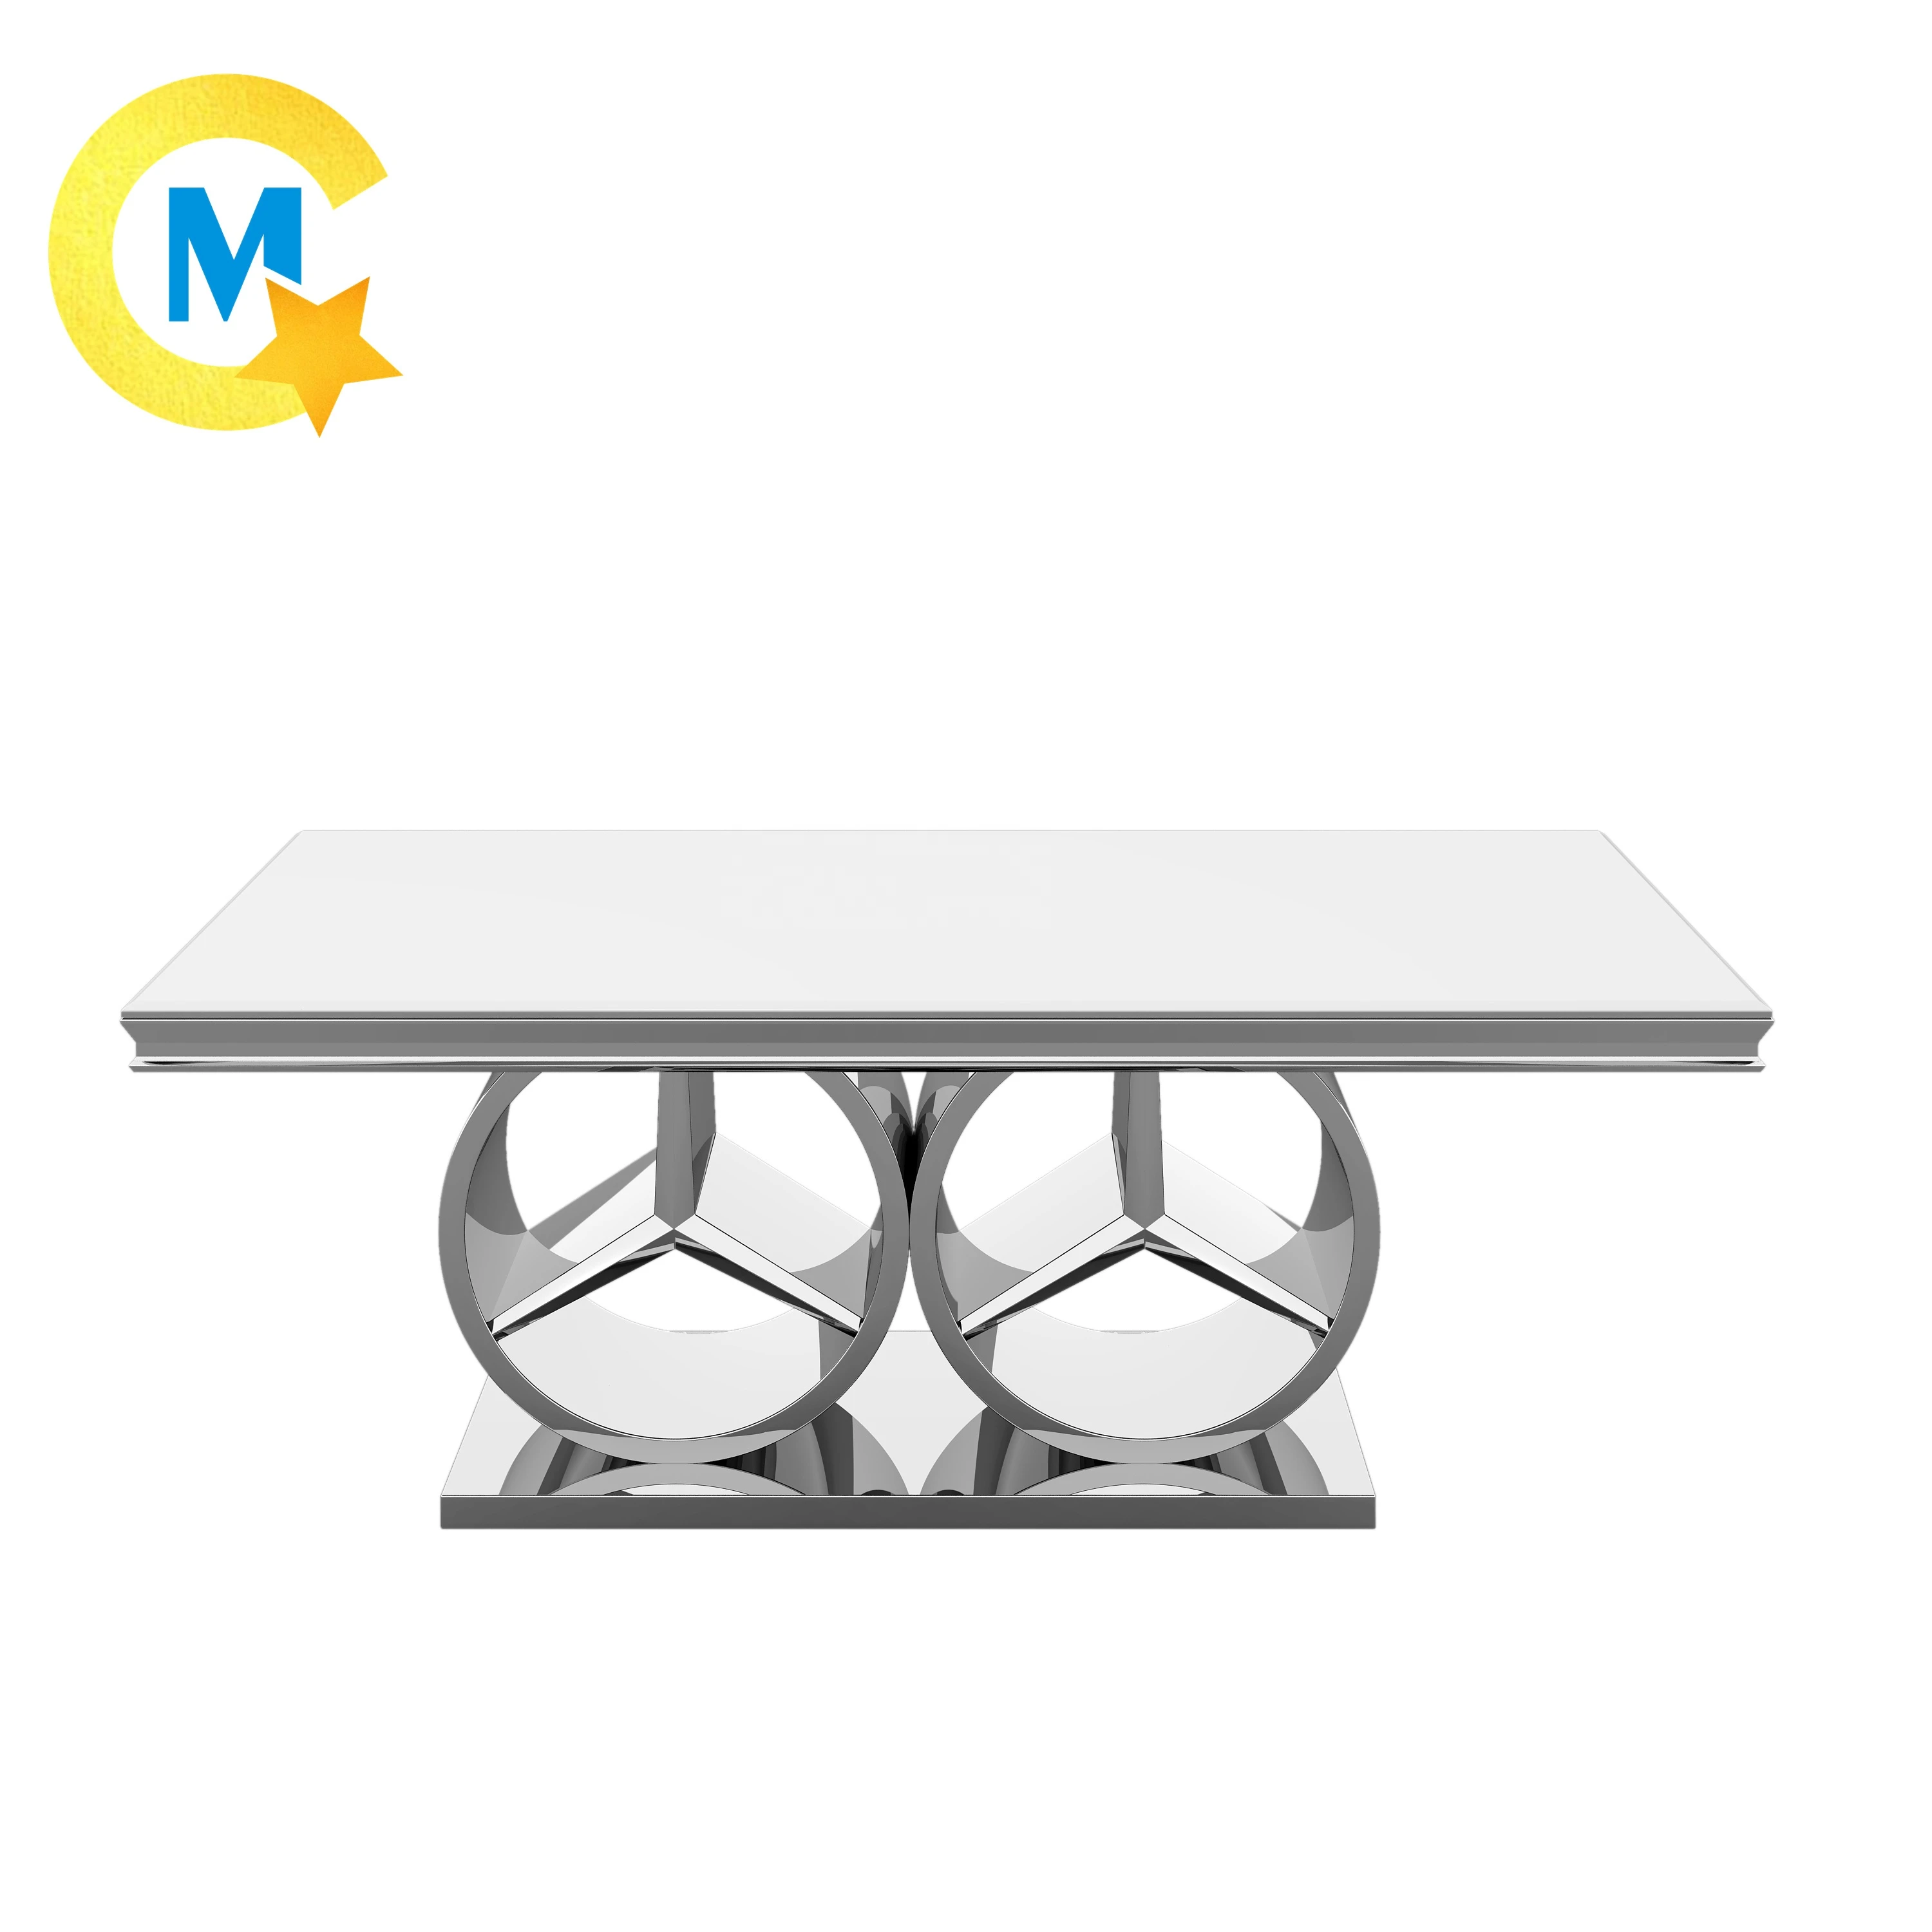 New design luxury furniture silver stainless steel frame marble top dining table